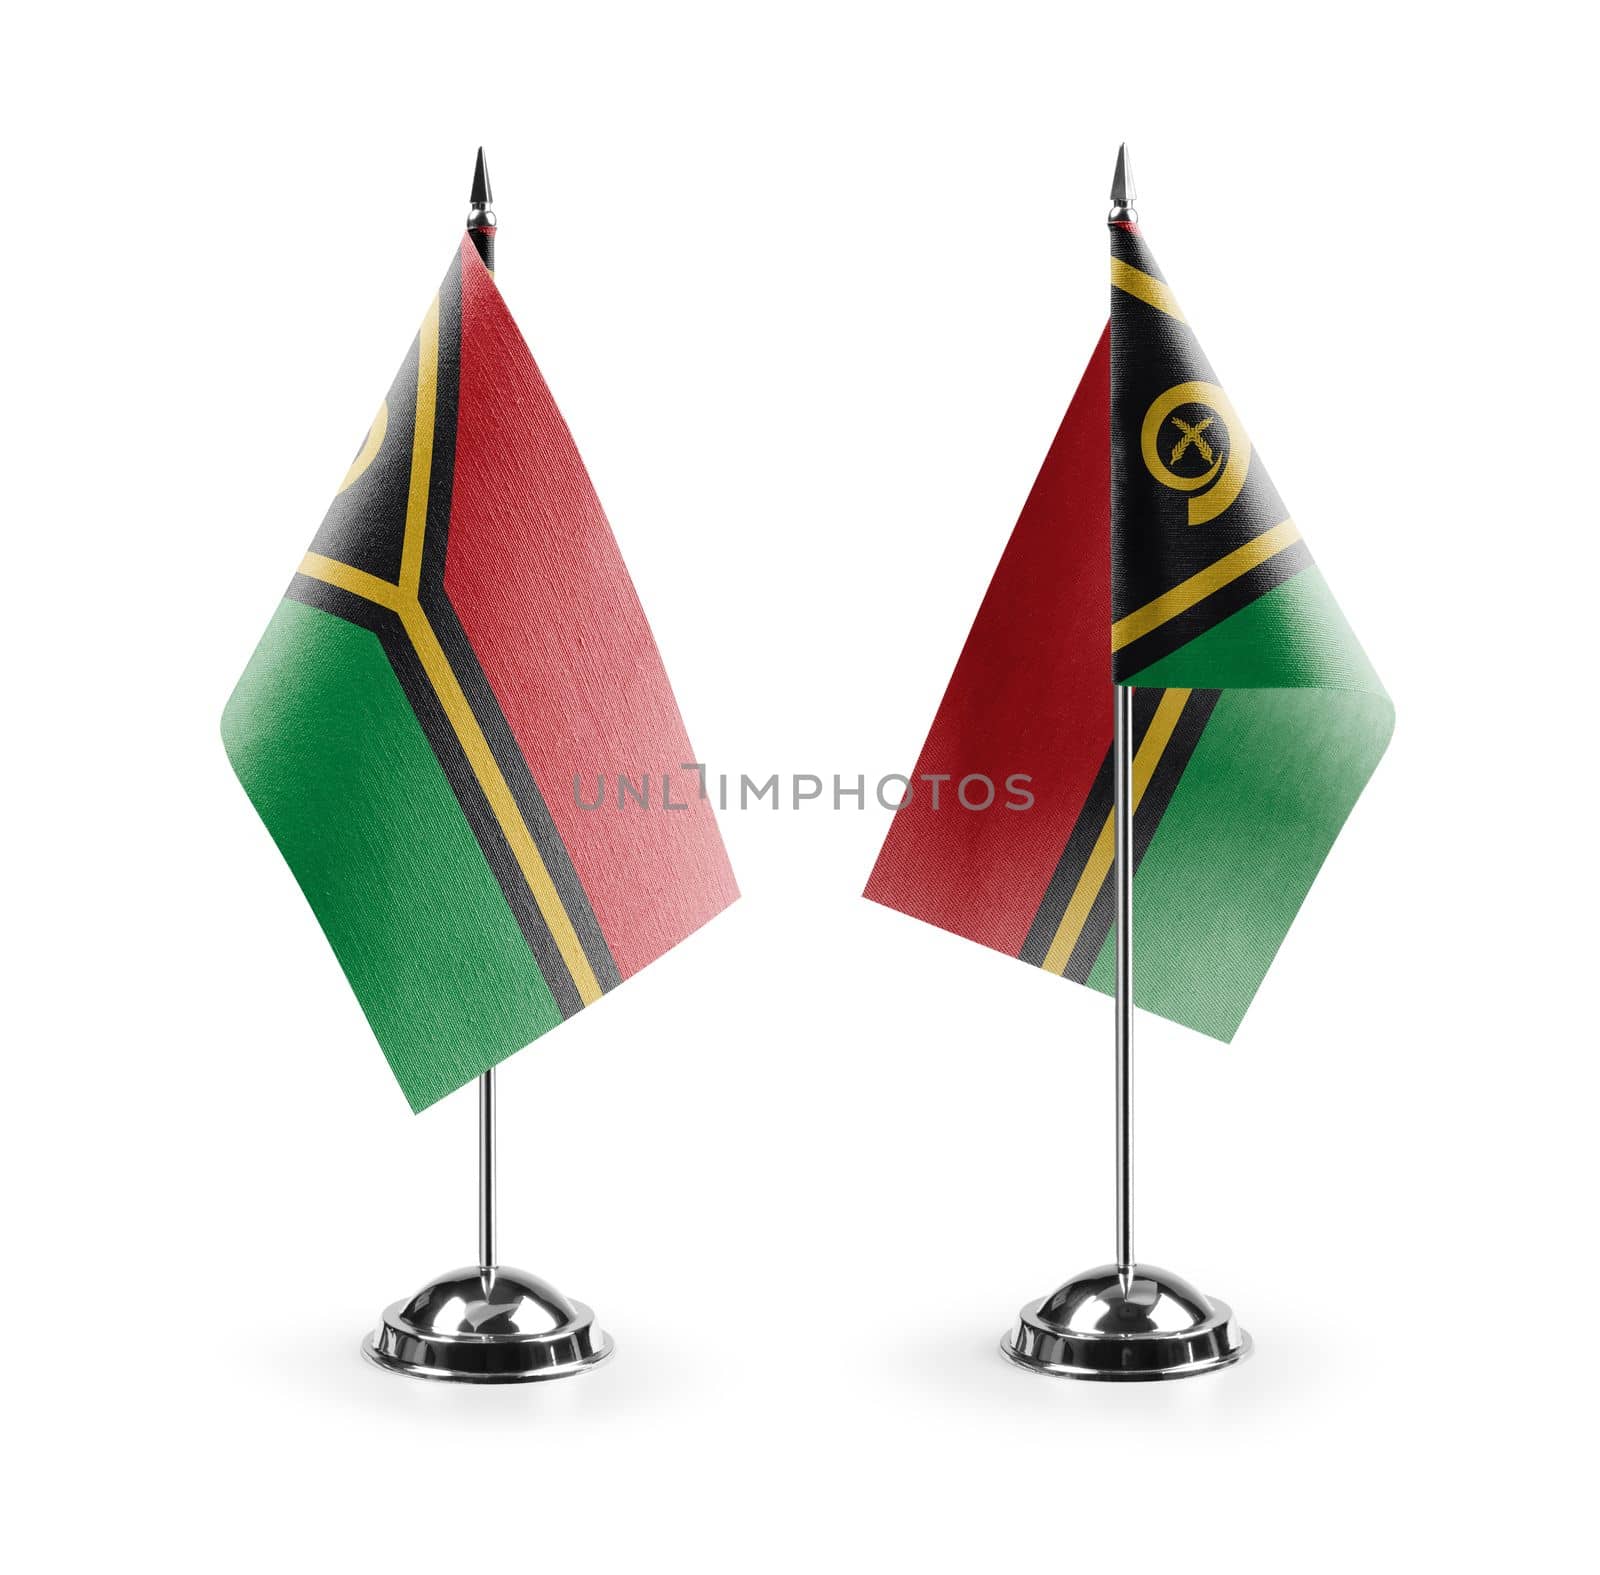 Small national flags of the Vanuatu on a white background by butenkow